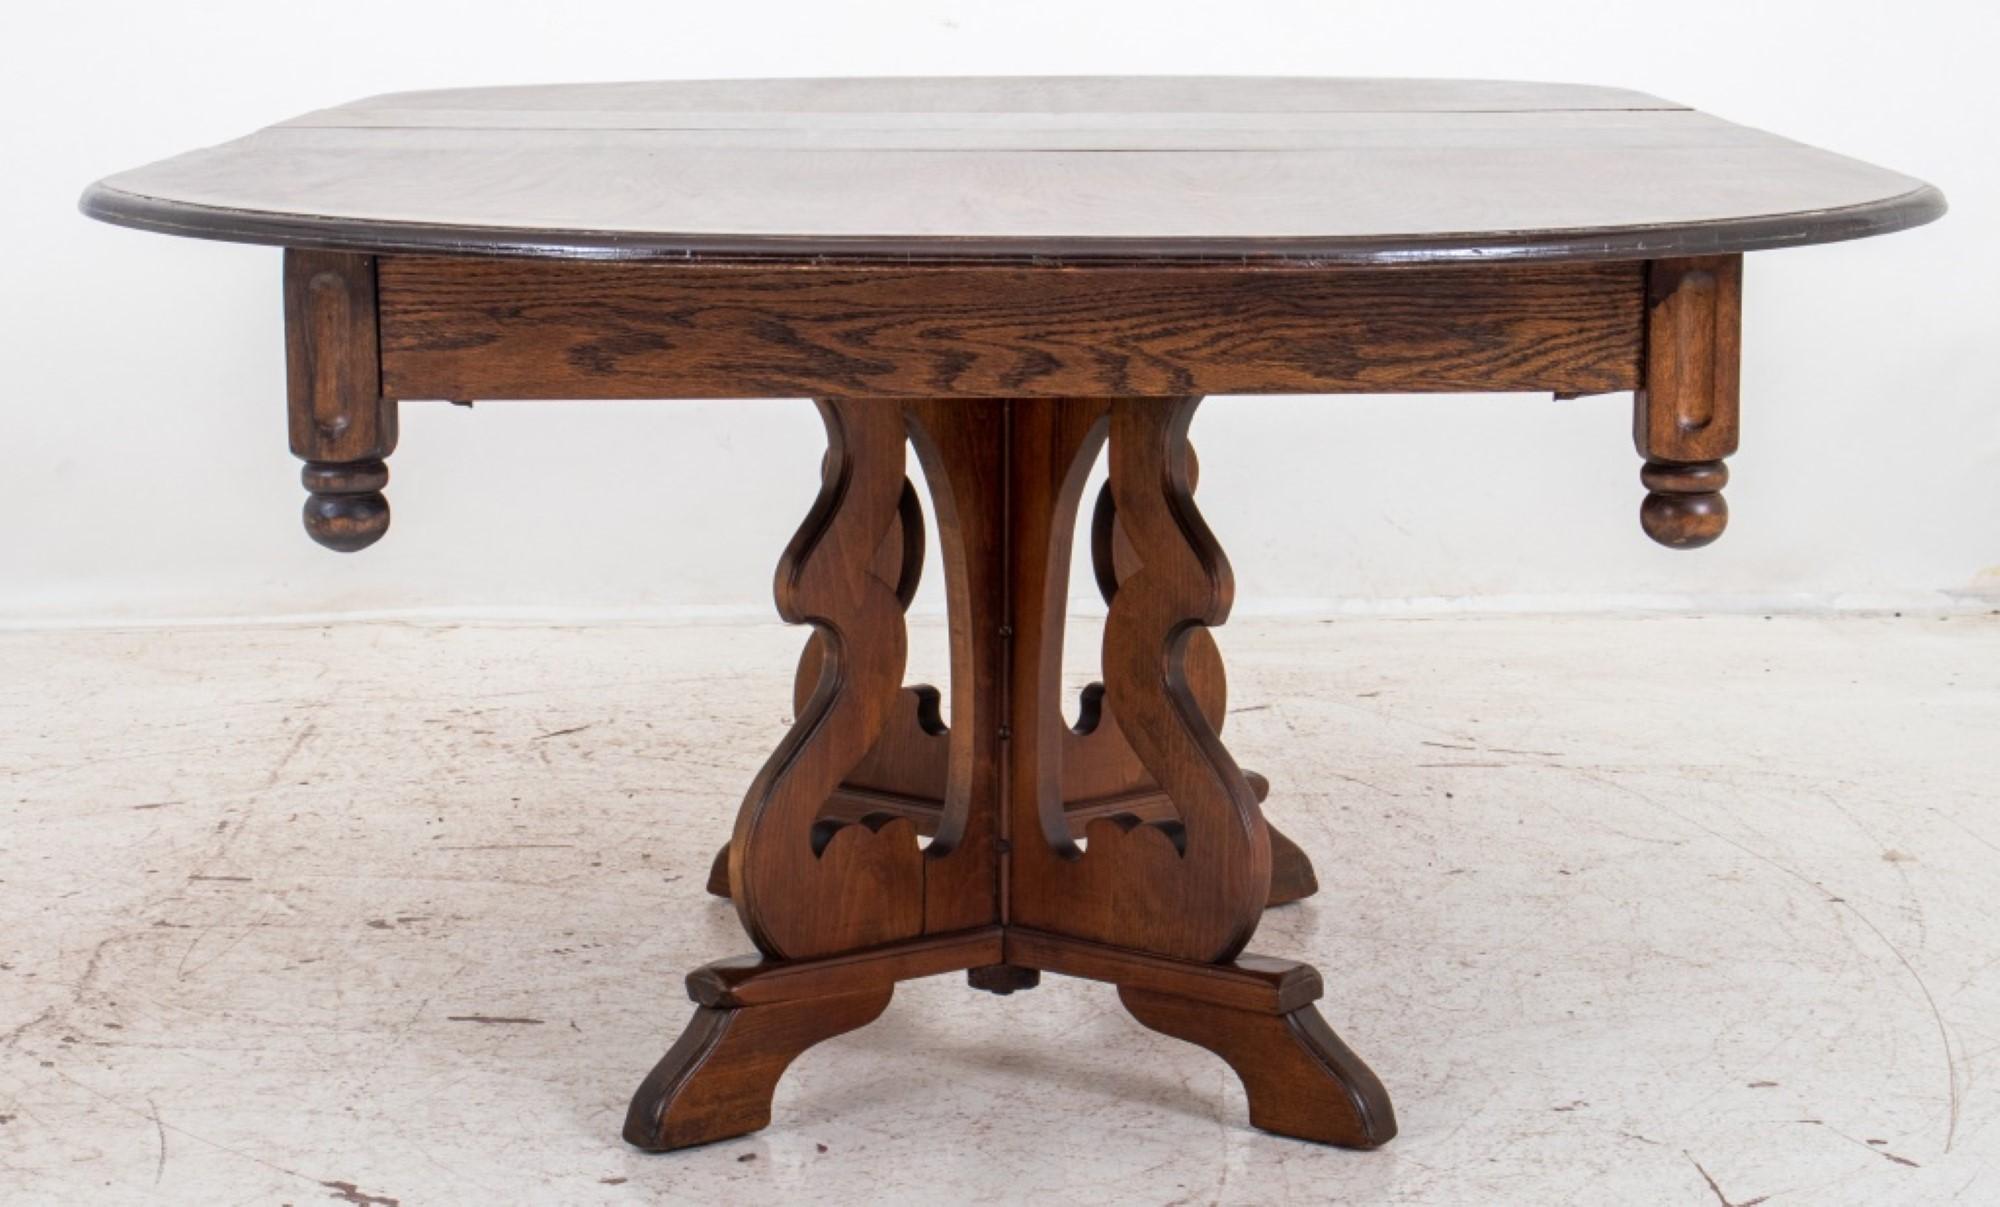 The dimensions for the Spanish Renaissance Revival extendable oak oval dining table are as follows:

Without Leaves:

Height: 28.5